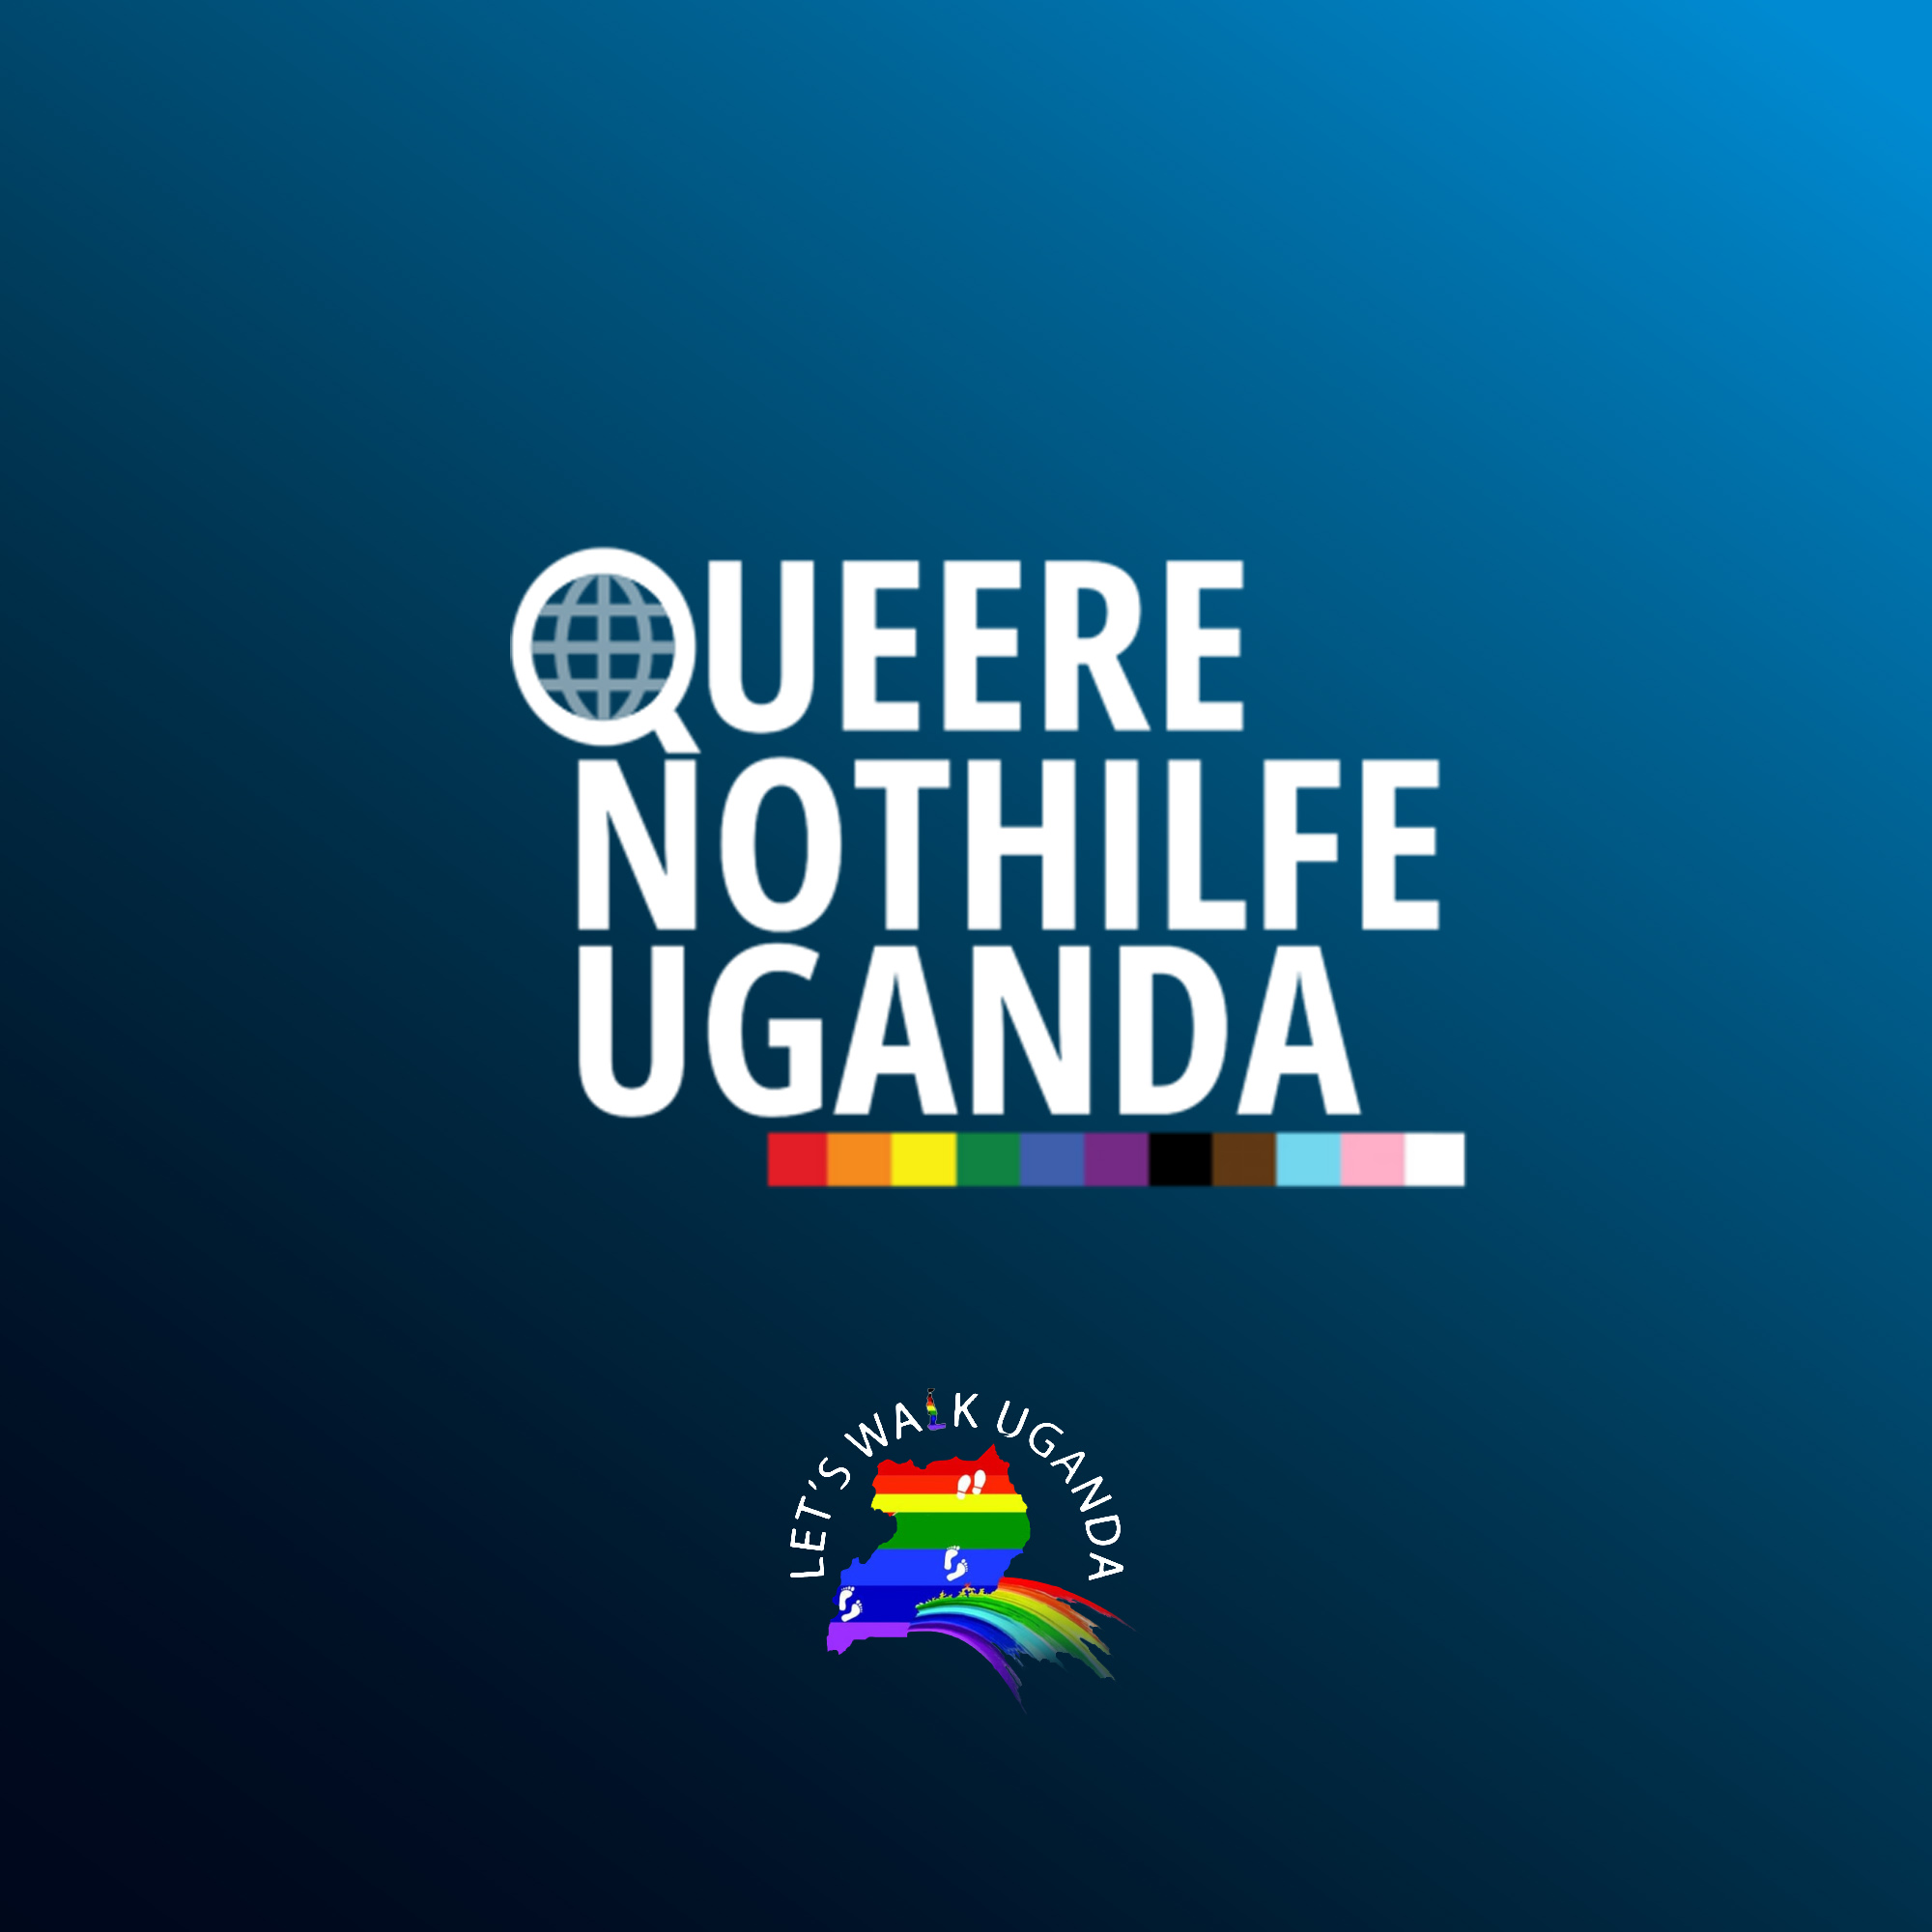 Queer Emergency Aid Uganda Alliance – Love is love. Humanrights are for everybody.